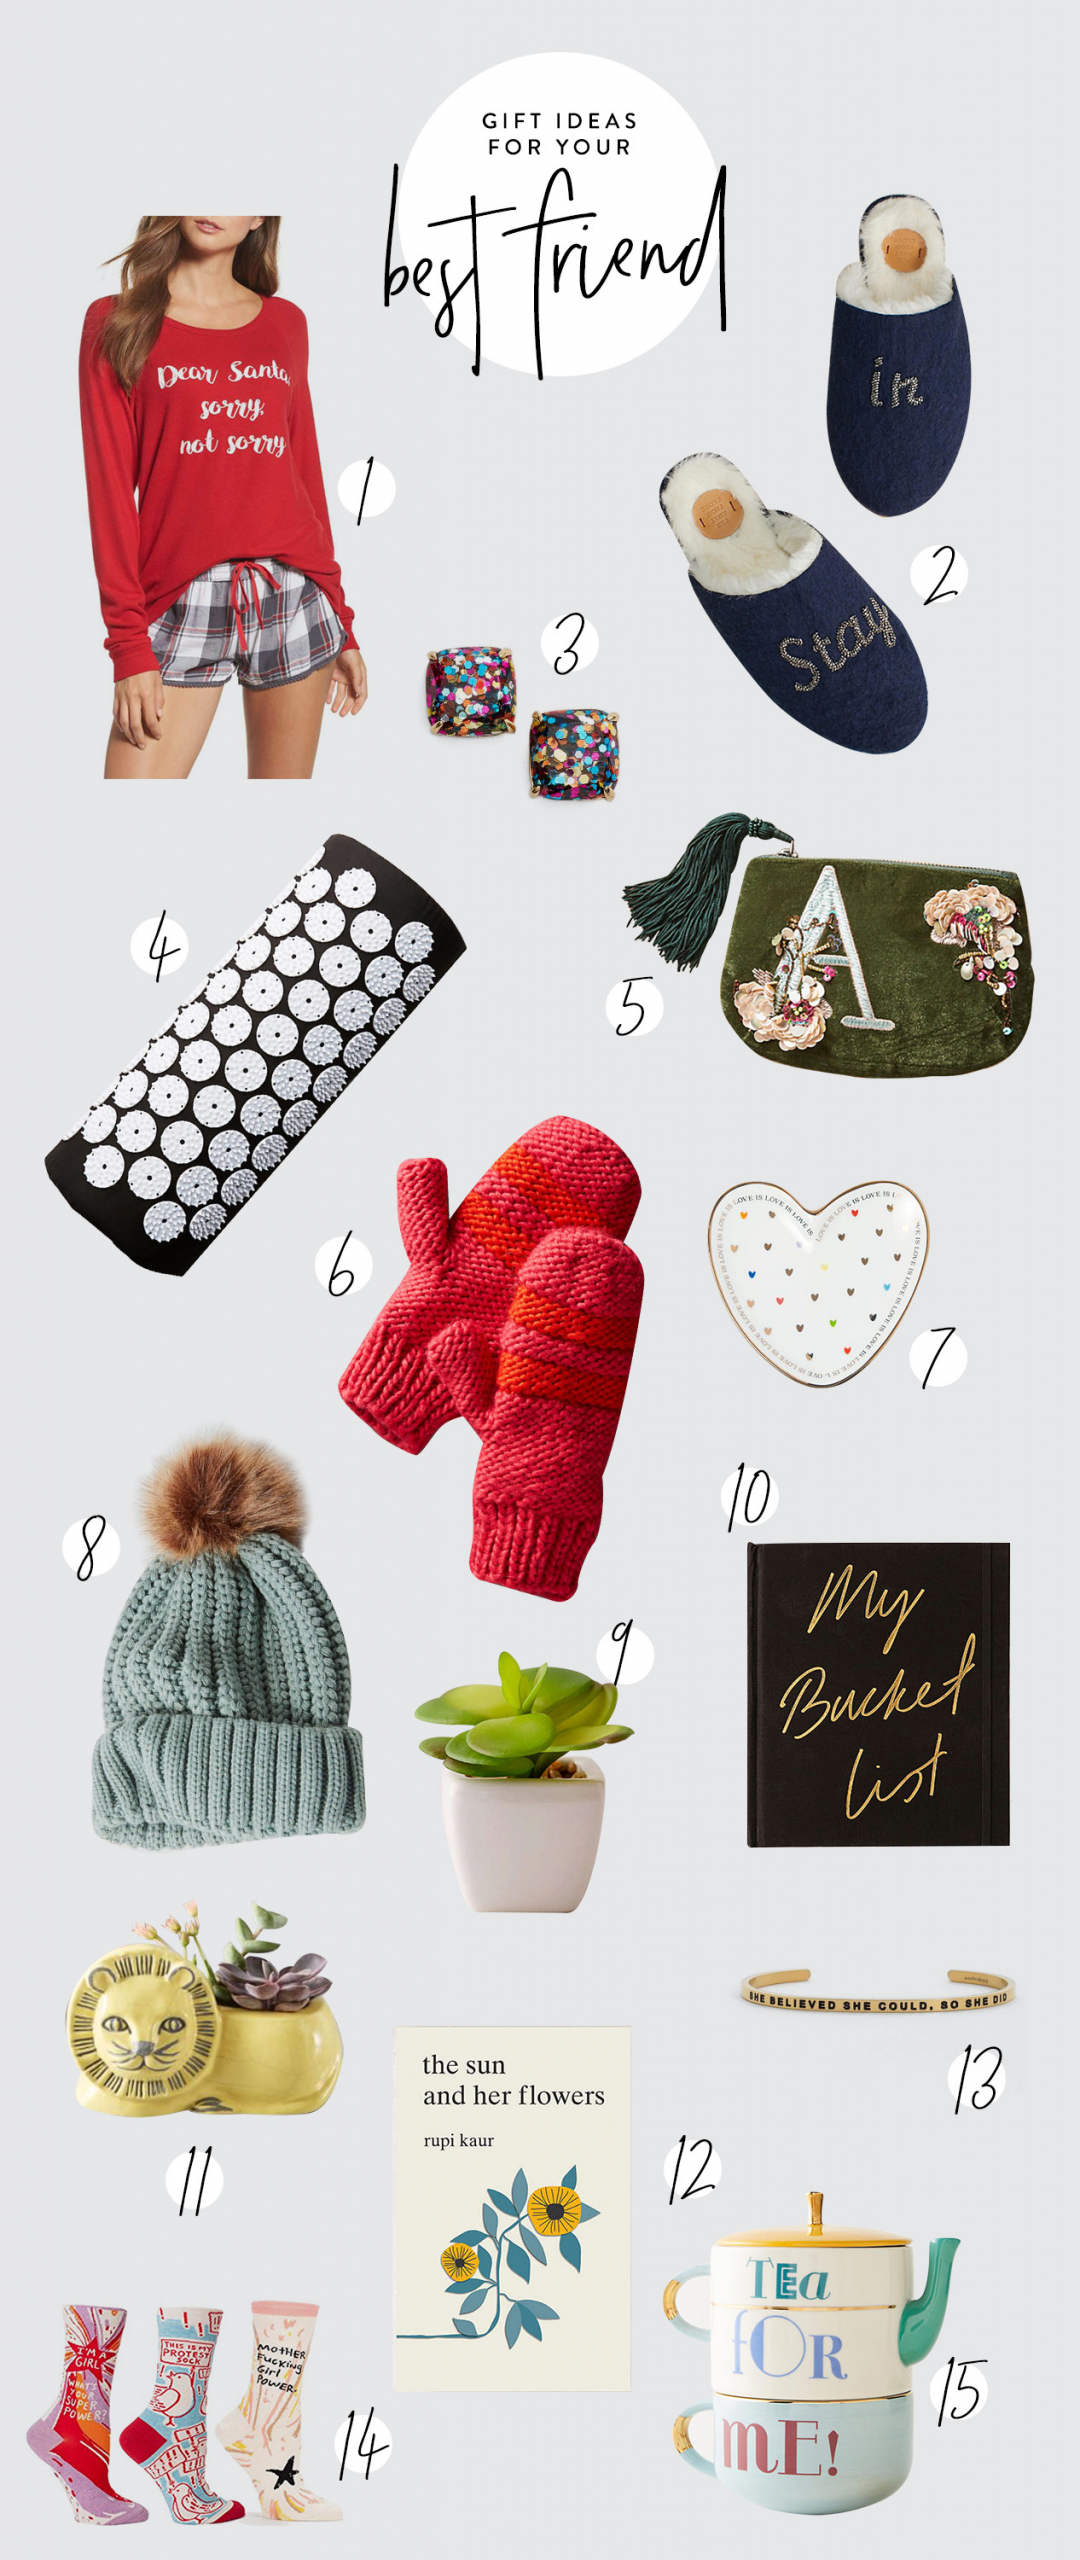 Best Friend Gift Ideas
 The Ultimate Guide for Holiday Gift Ideas